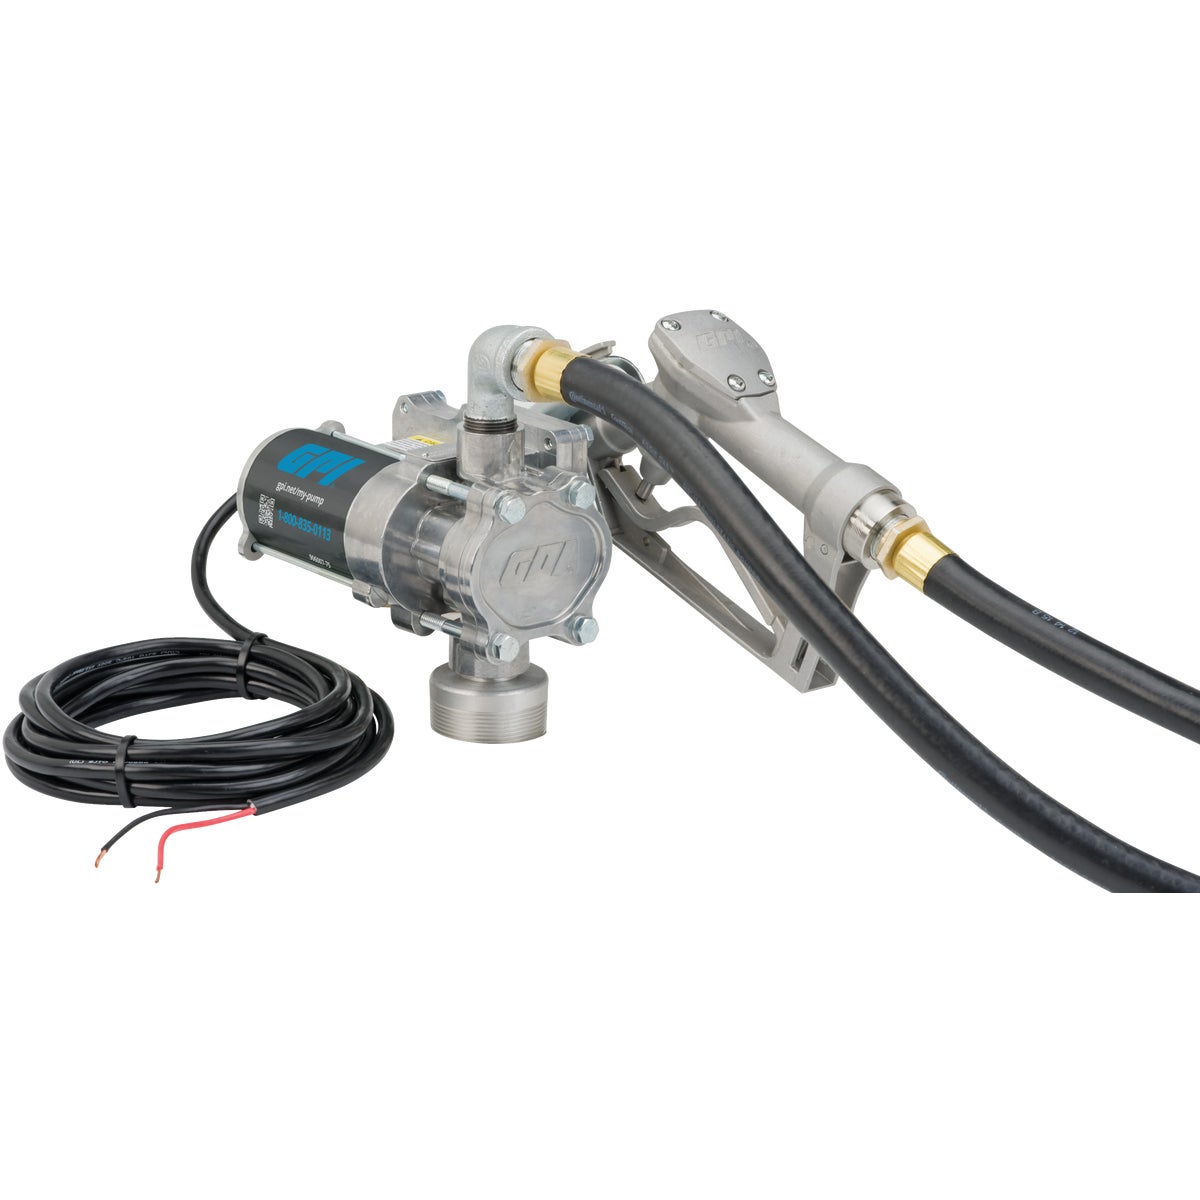 Item 570445, Lightweight and easy to handle, the EZ-8 fuel transfer pump is deal for on-